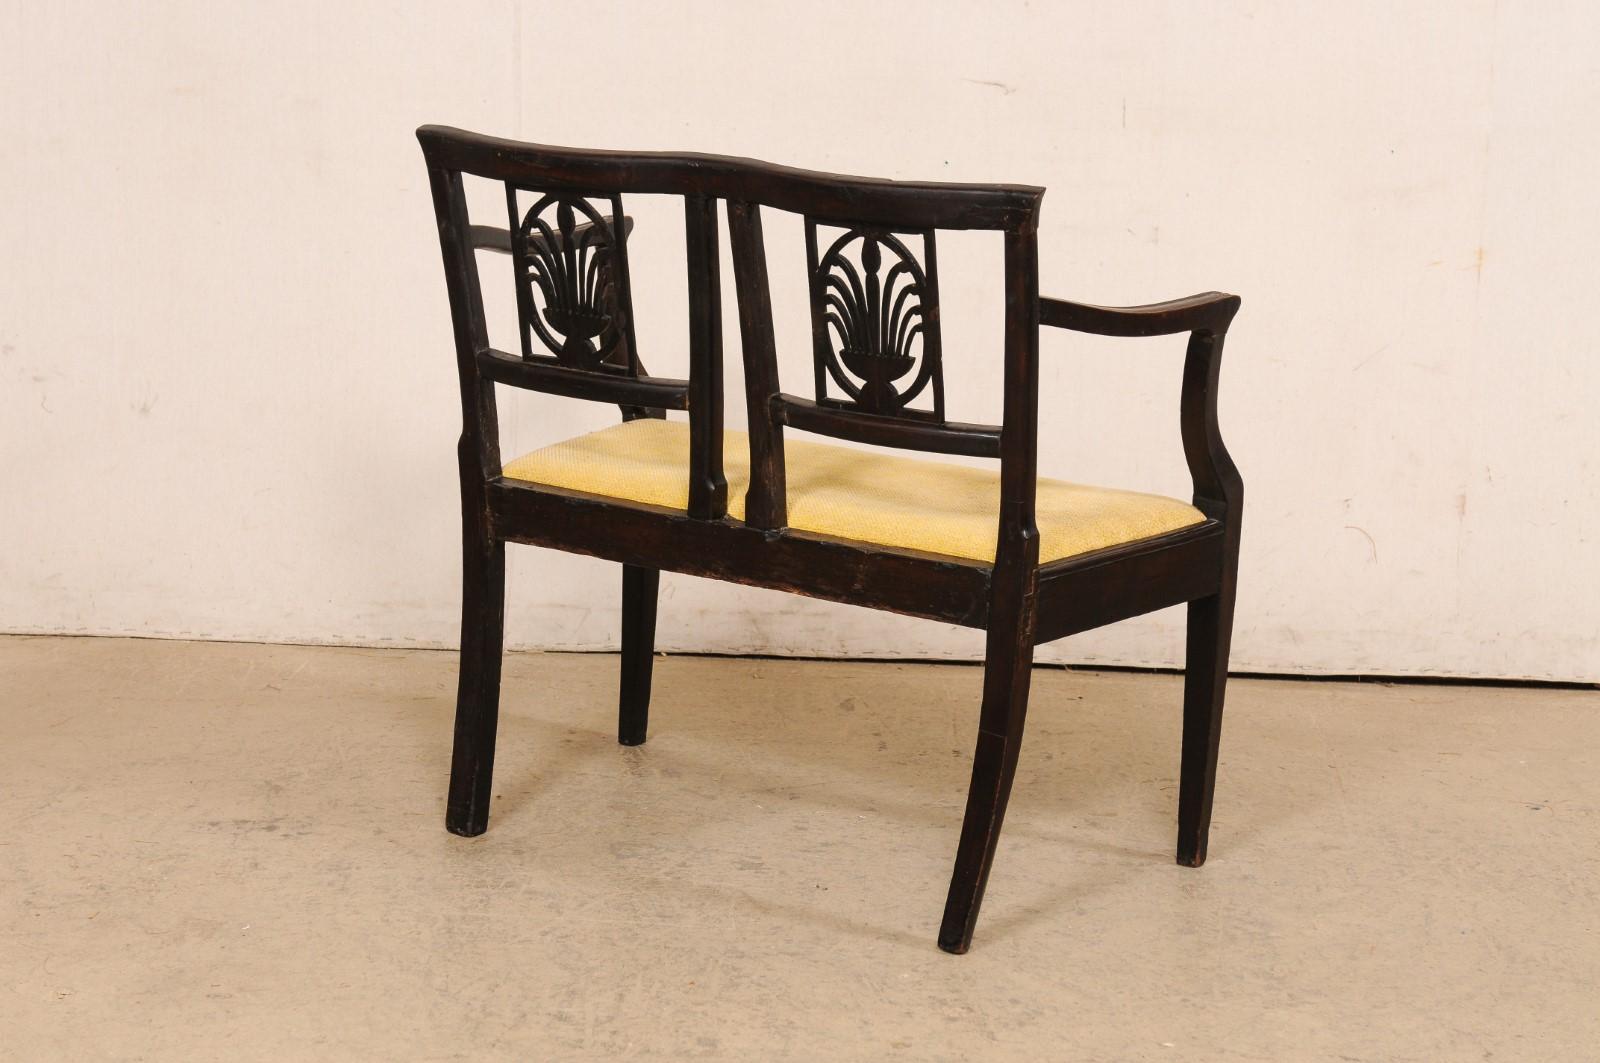 Italian Neoclassic Two-Seat Chair Settee, Late 18th C. For Sale 1